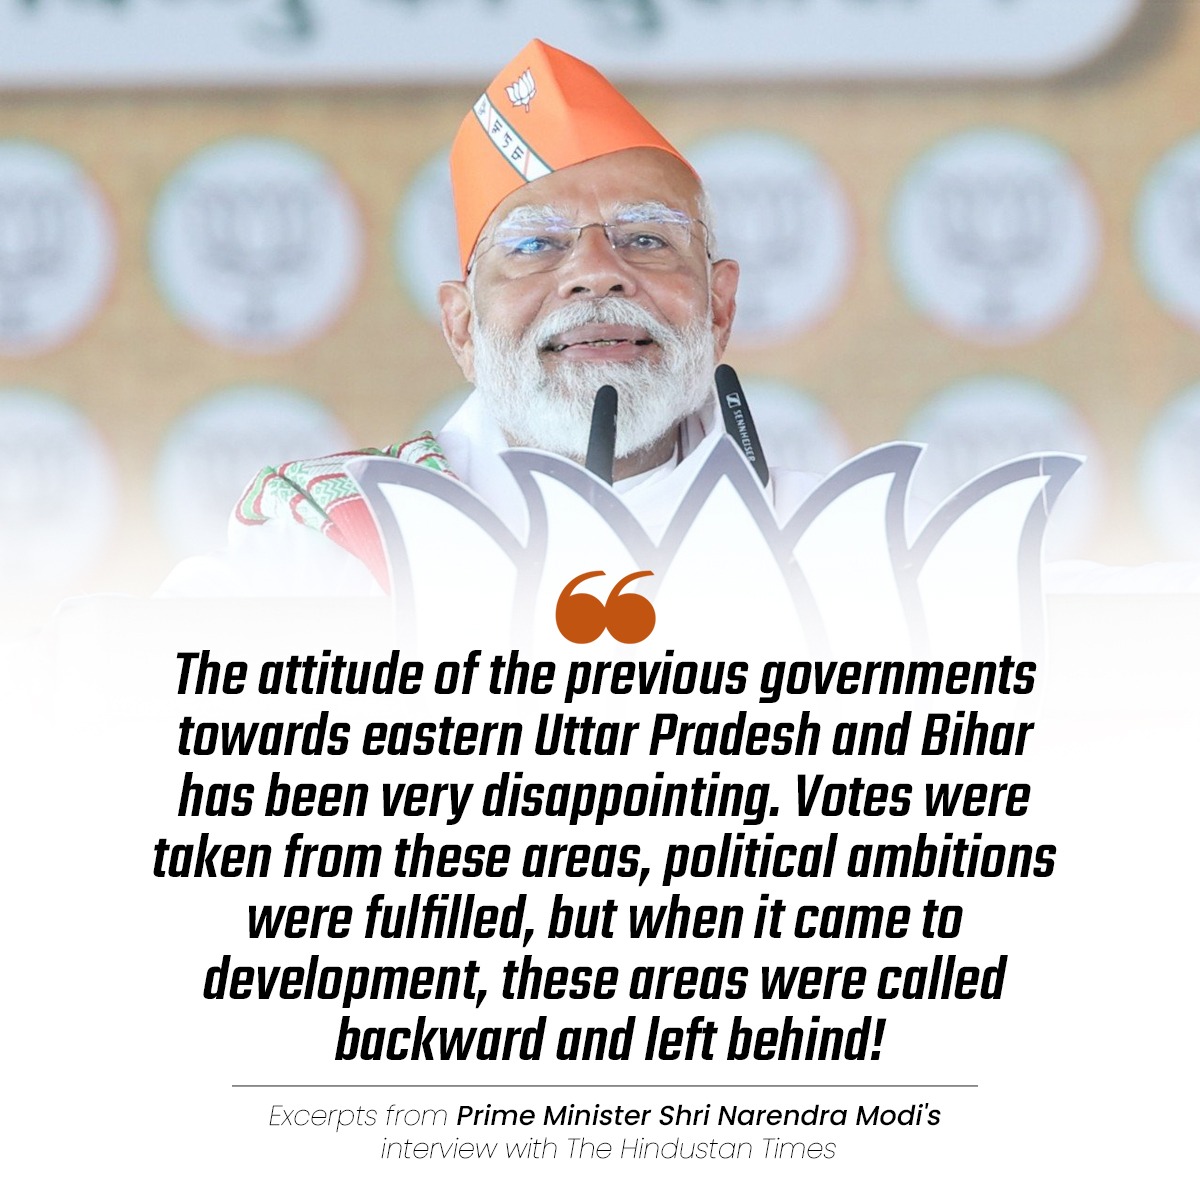 The attitude of previous governments towards eastern Uttar Pradesh and Bihar has been very disappointing... - PM @narendramodi